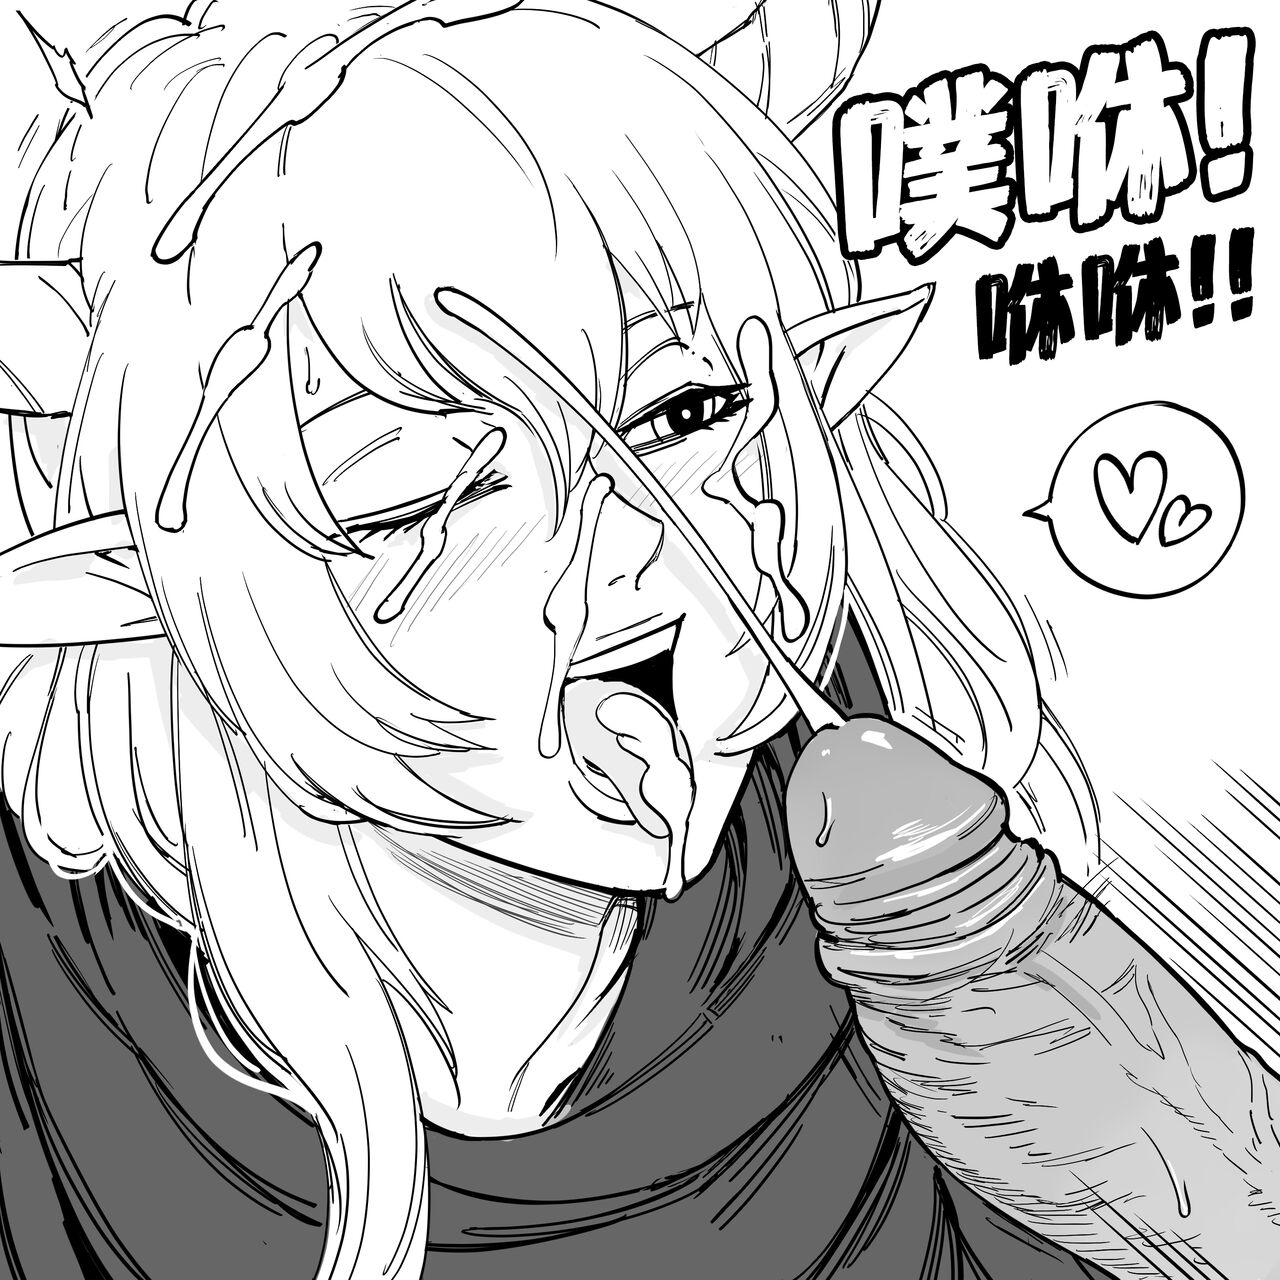 [BB (Baalbuddy)] That One Time When the GACHA HORNED ELF Healer Tank claimed that She was doing a Medical Checkup and then did LEWD things to my BODY (Arknights) [Chinese] 